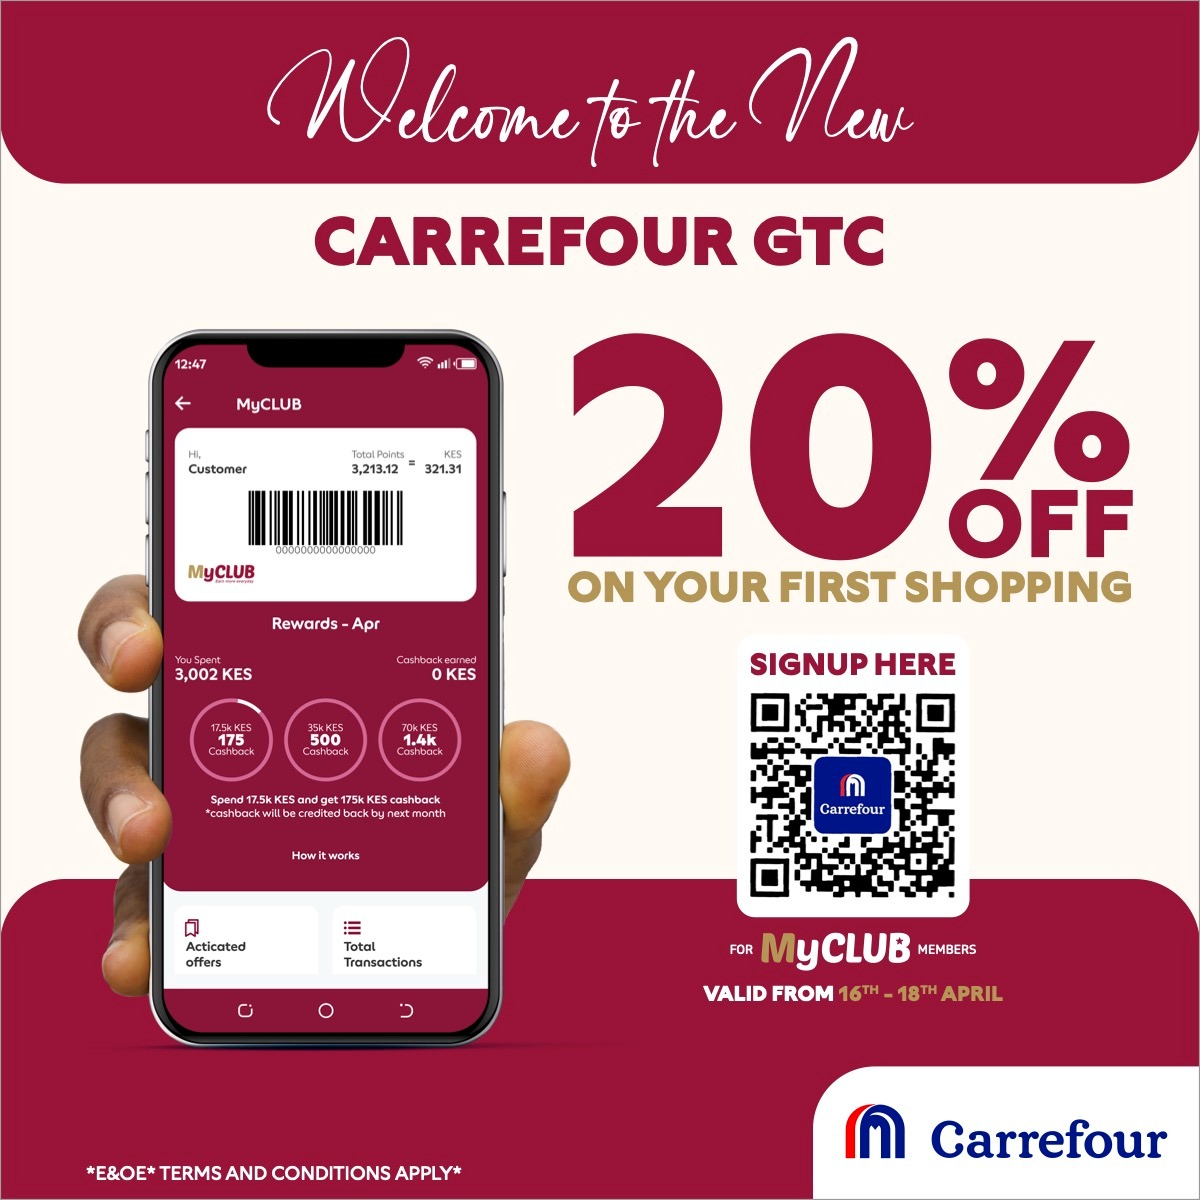 Indulge in the future of retail at Carrefour GTC Branch – where every purchase is an adventure. And with our special 20% MyClub discount, your first shopping trip is even more rewarding. #CarrefourGTC